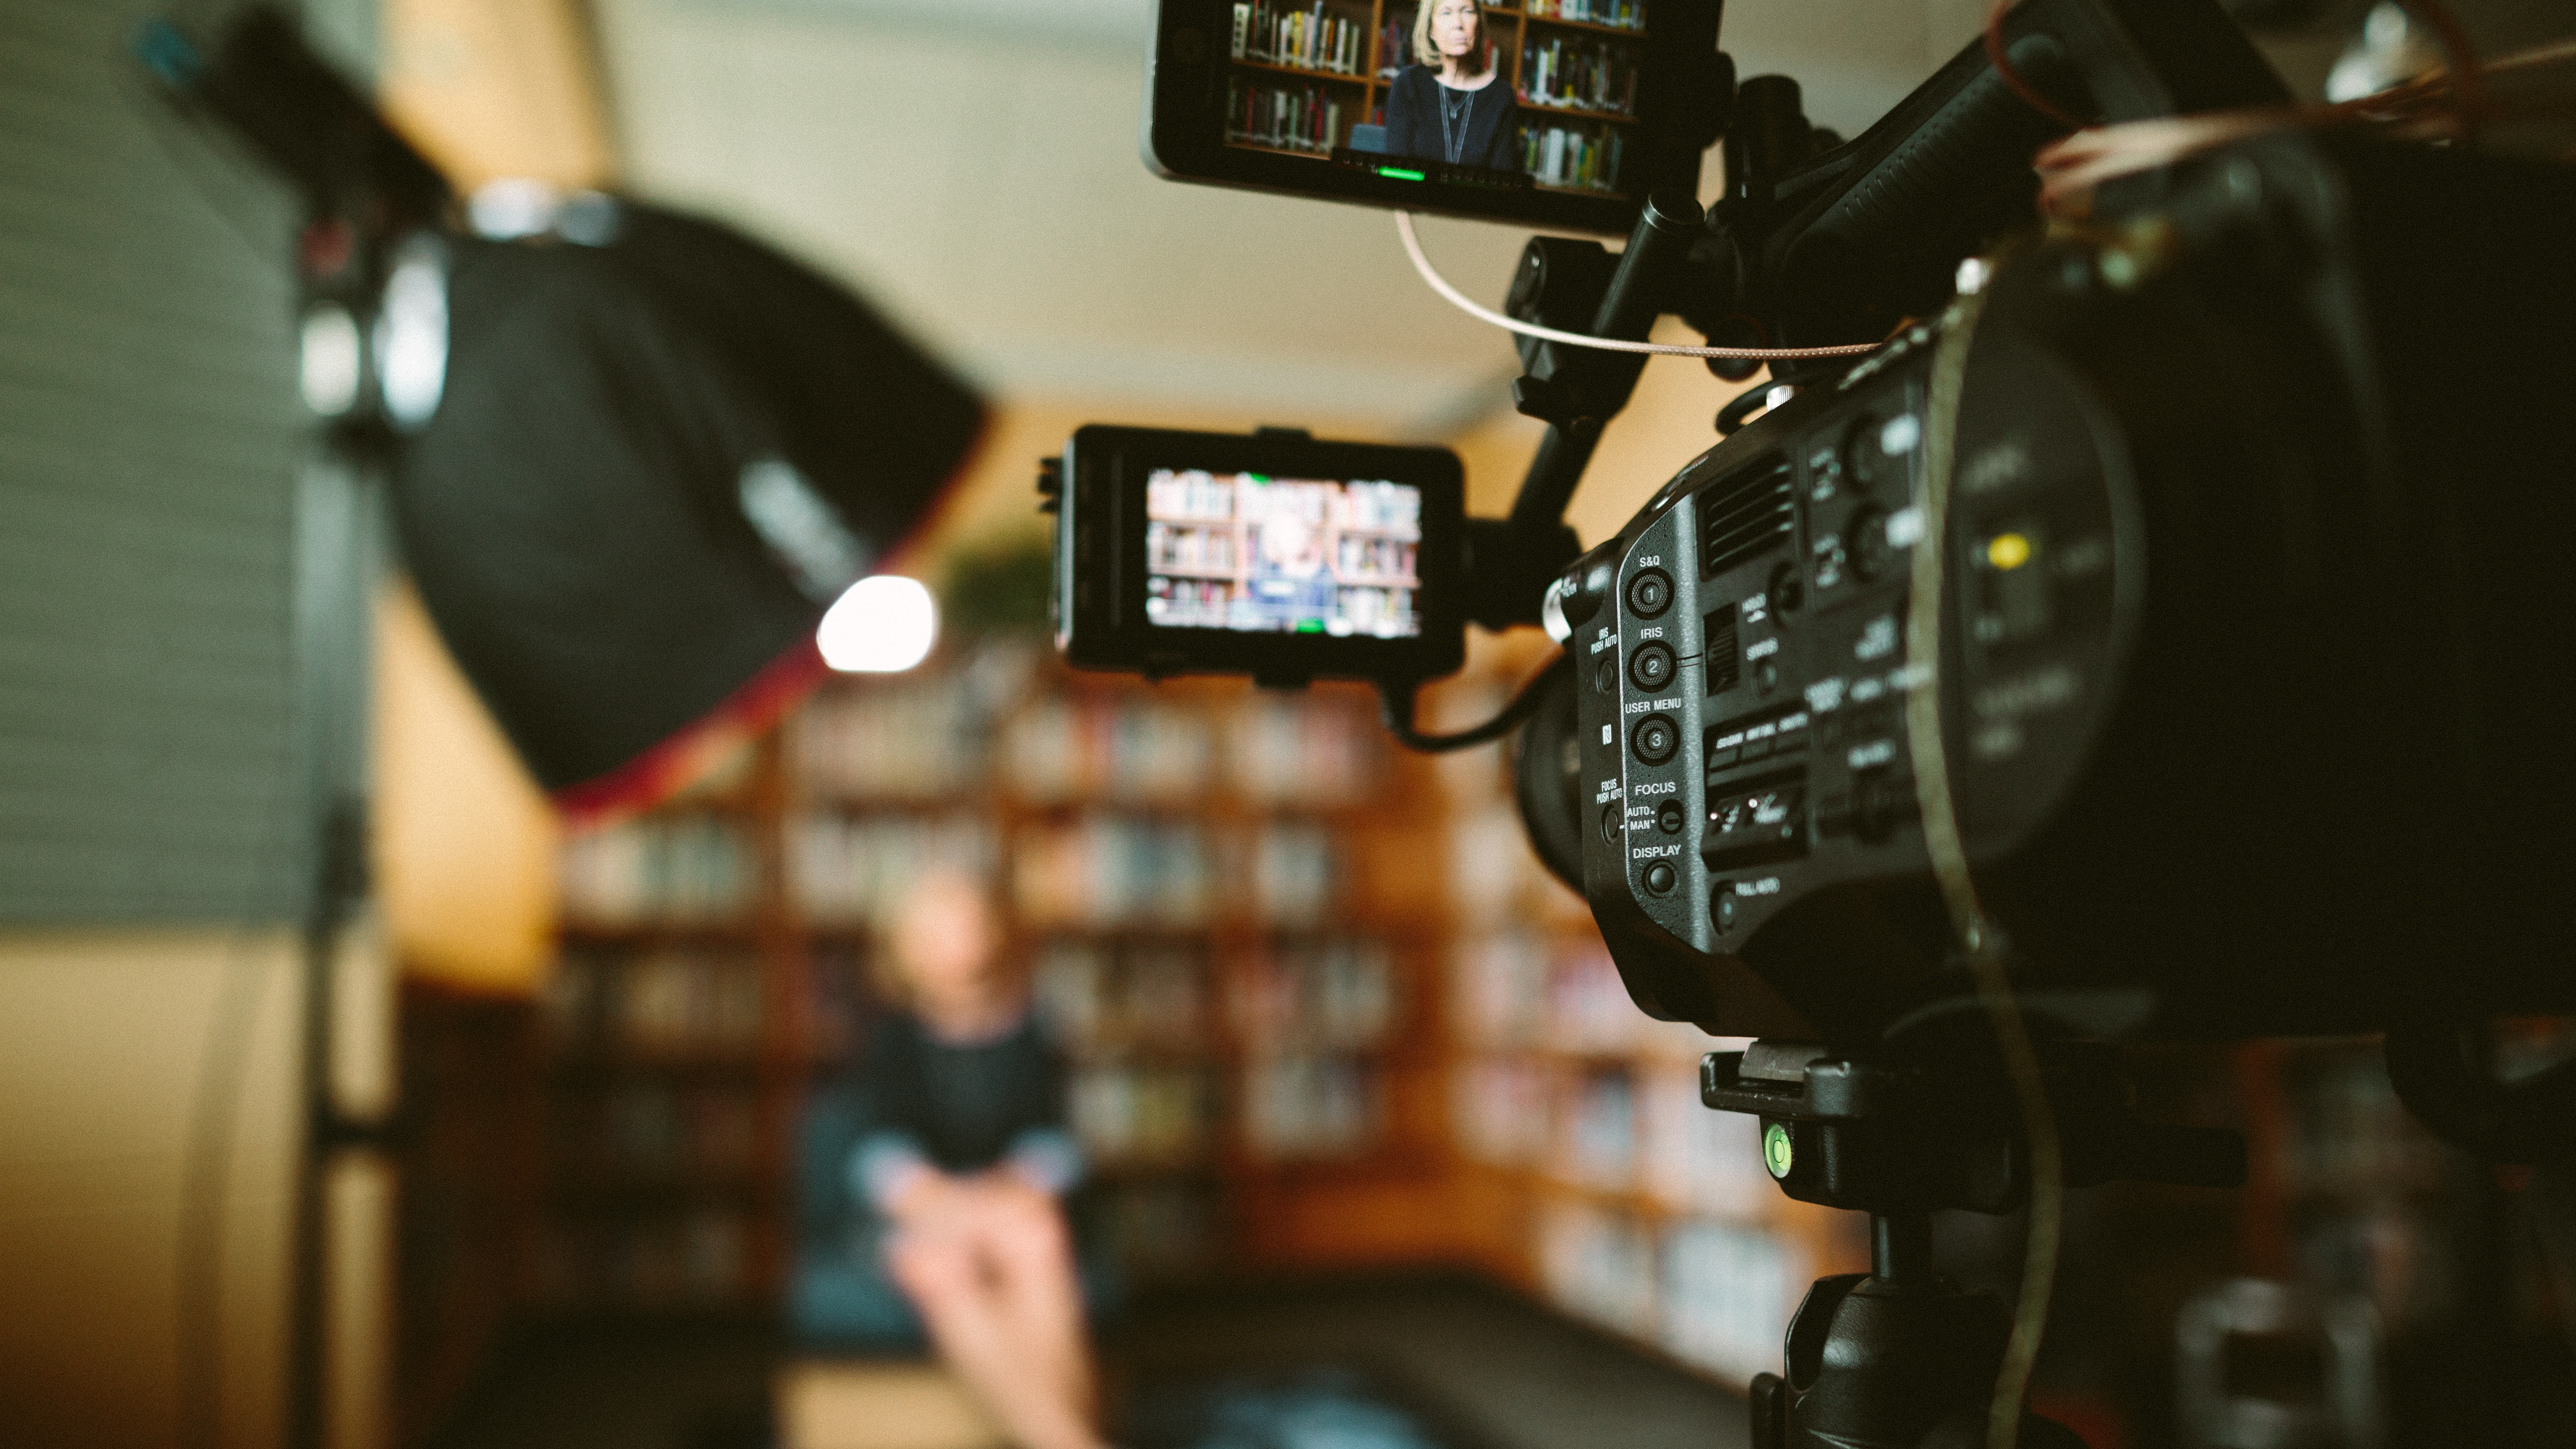 How to prep for successful media interviews